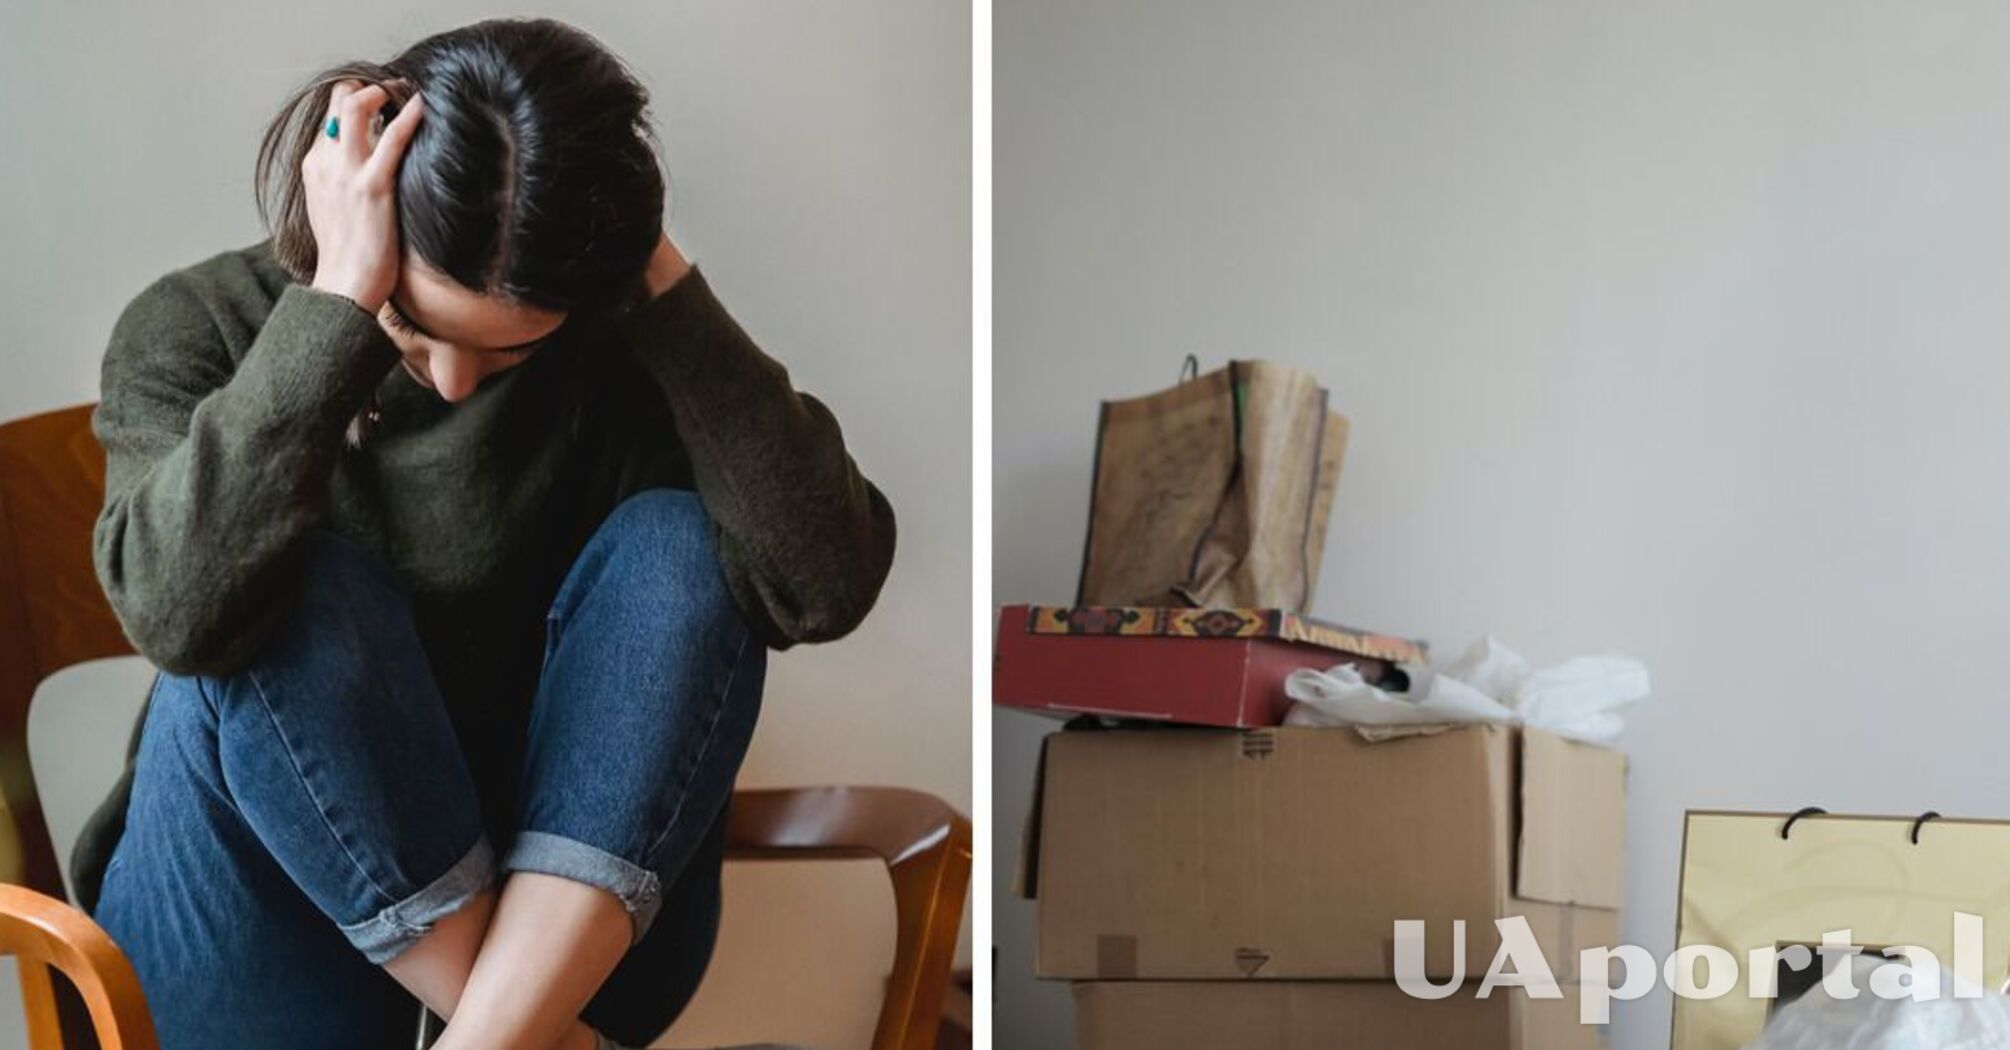 Immediately throw out of the house: these items can drive you into depression